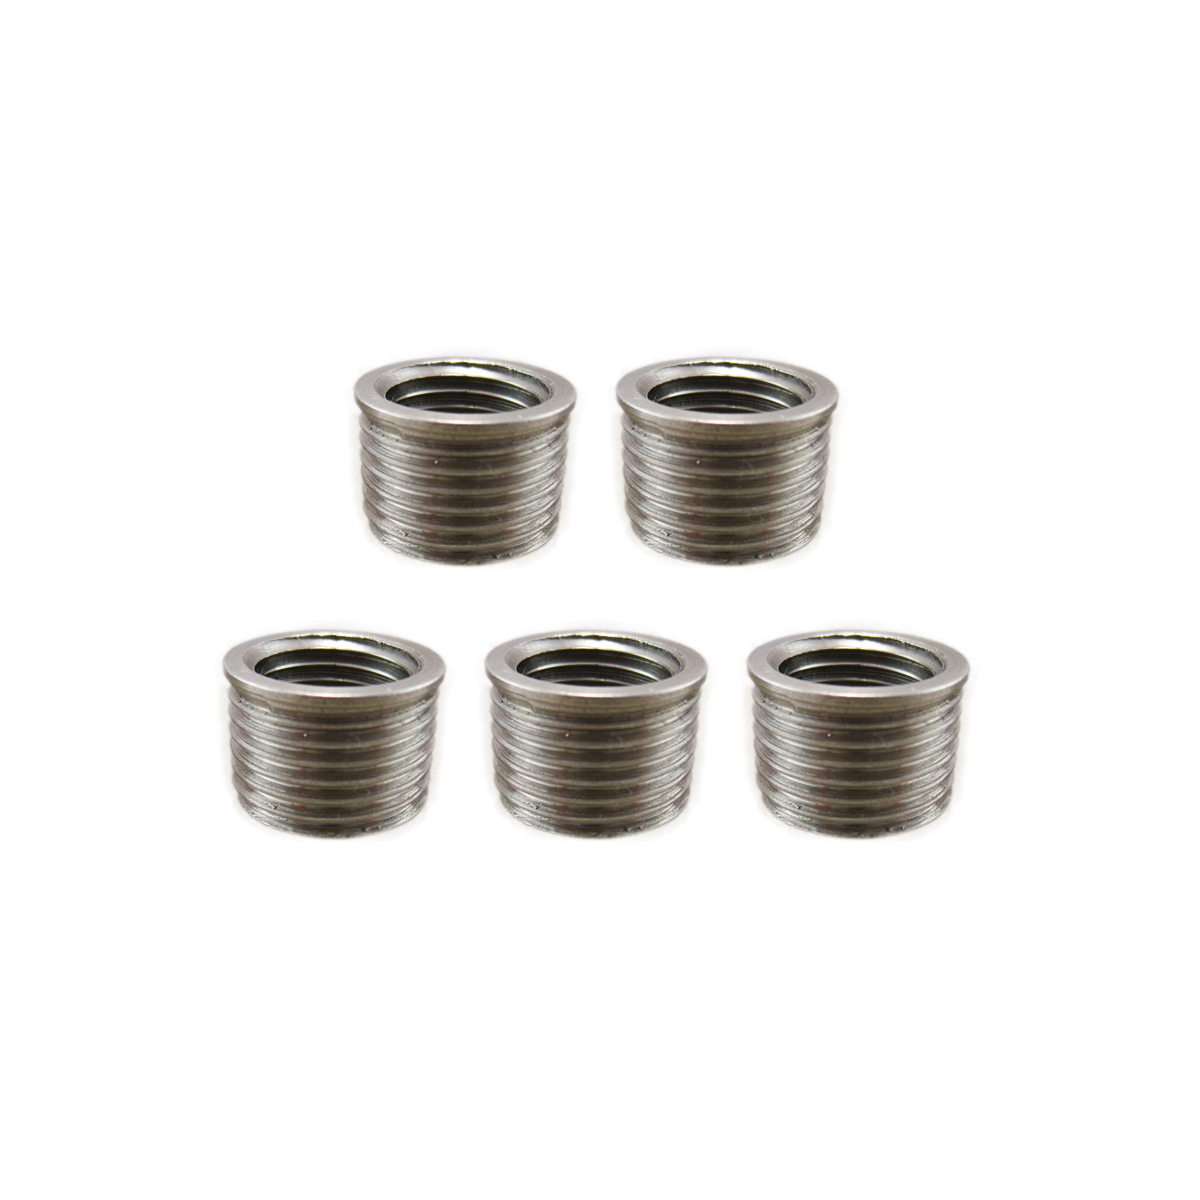 taper-seat-stainless-steel-inserts-5-pack